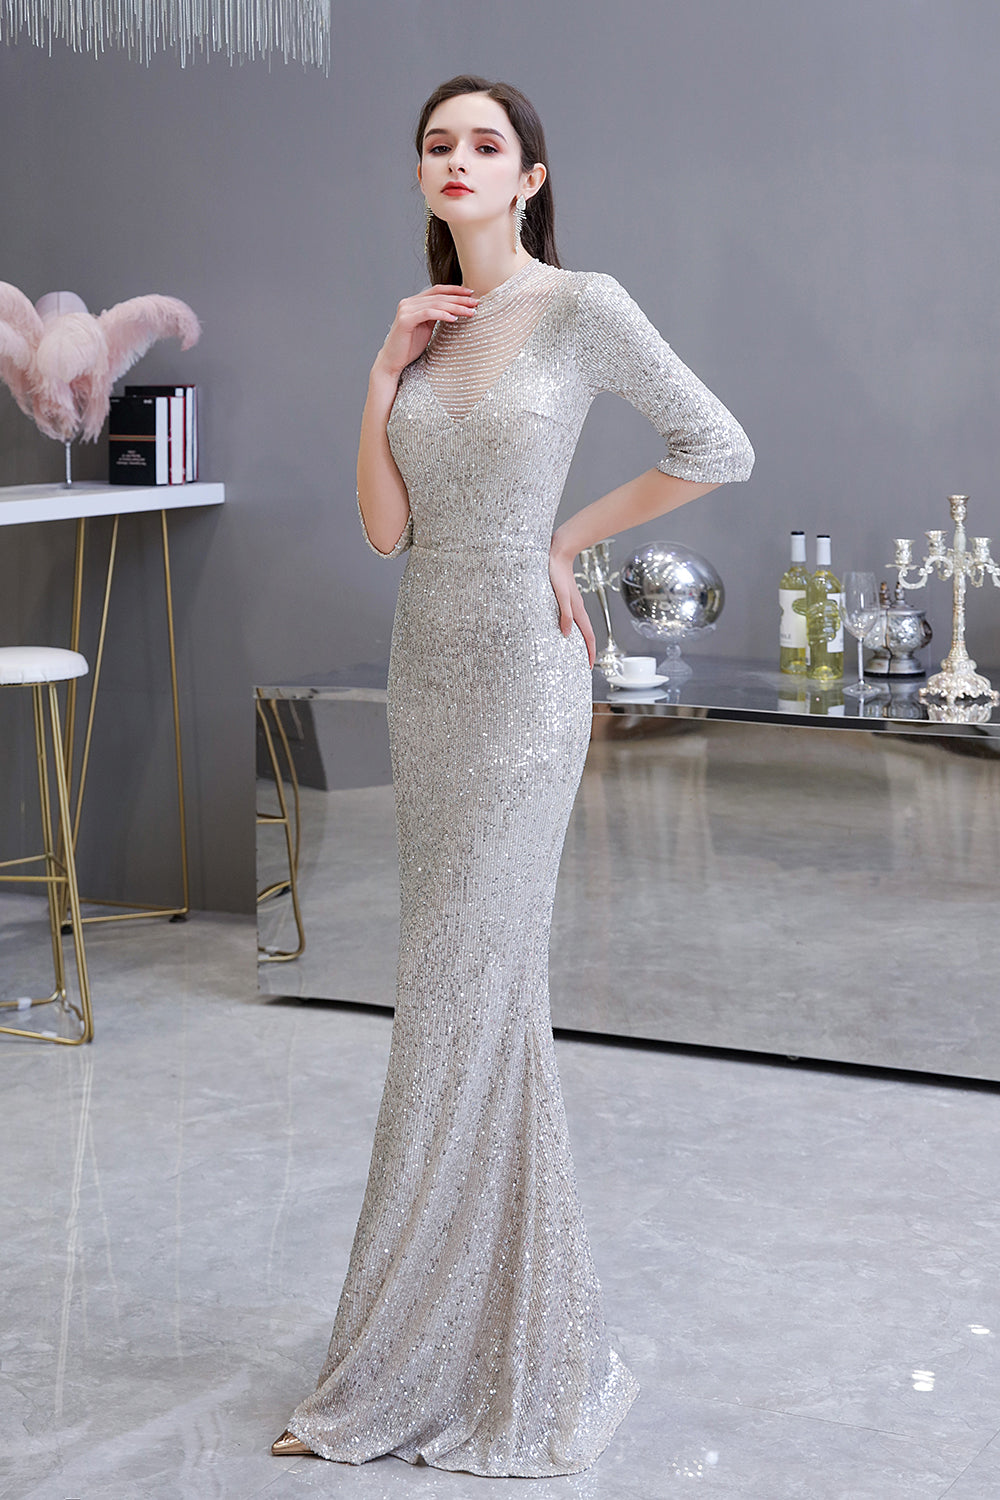 Silver Half Sleeve Sequins Prom Dress | Mermaid Long Evening Gowns